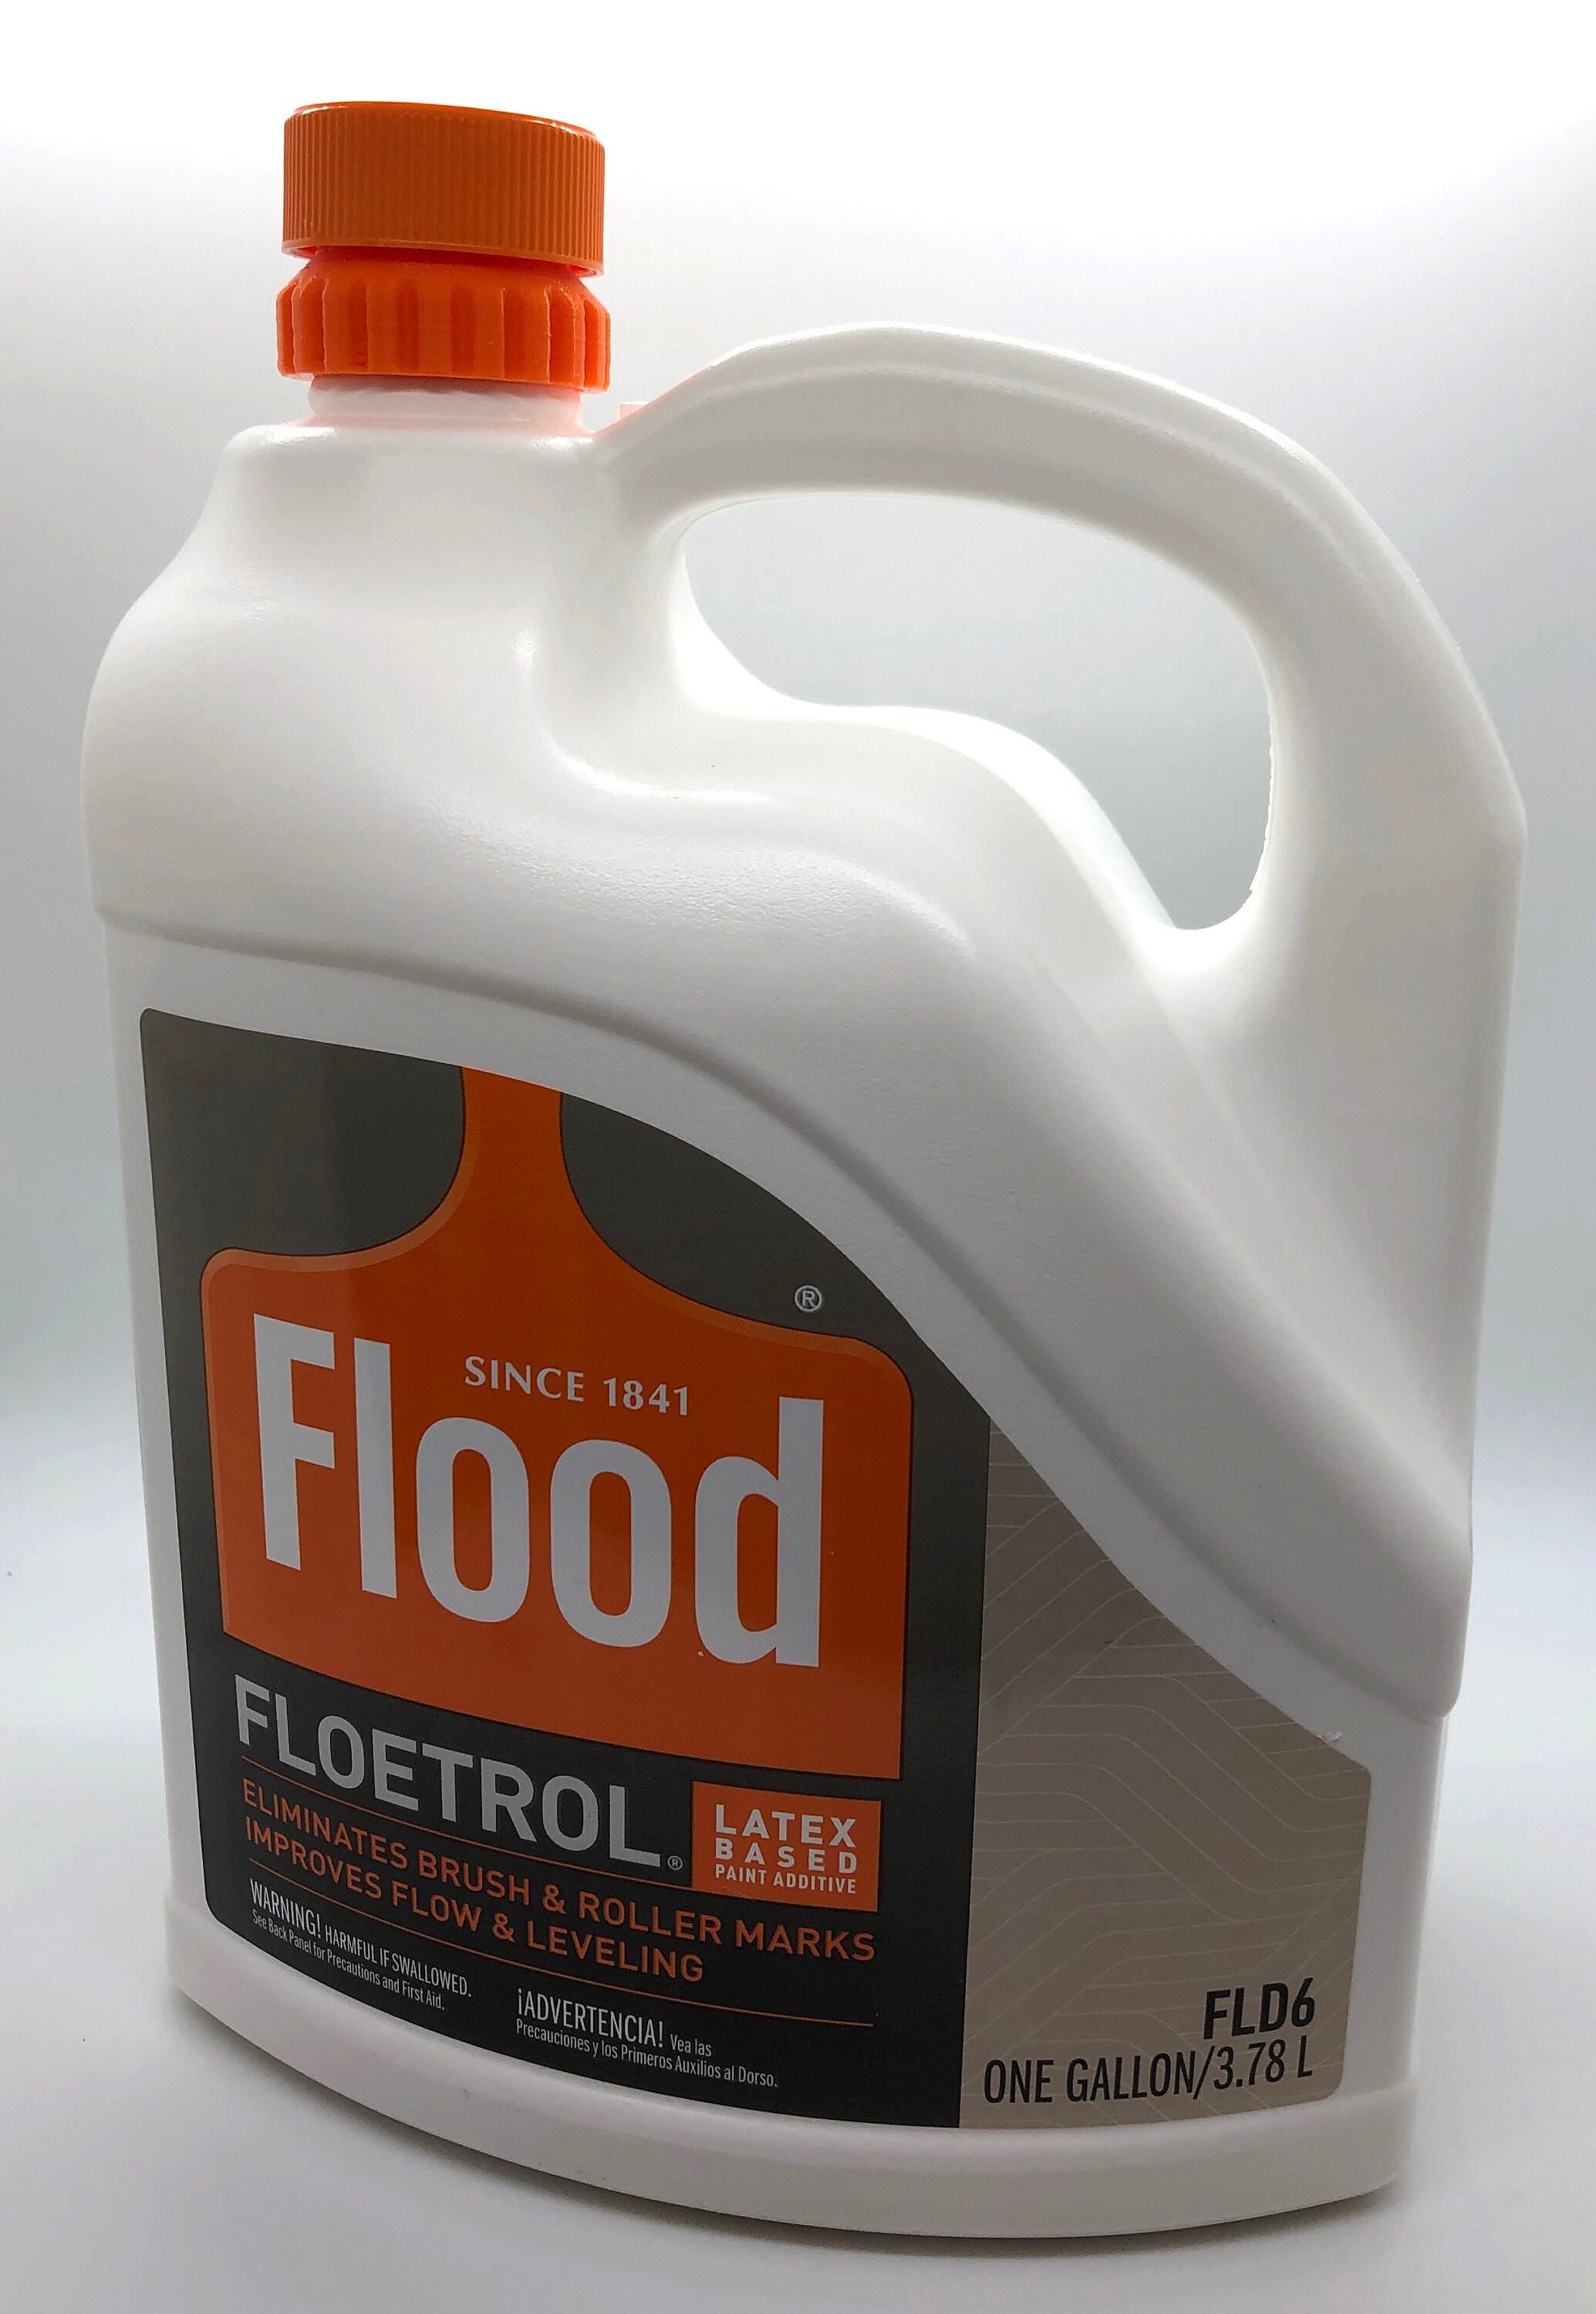 Two Floetrol Filters One Standard & One Fine Mesh for Use With Flood Gallon  Jug 